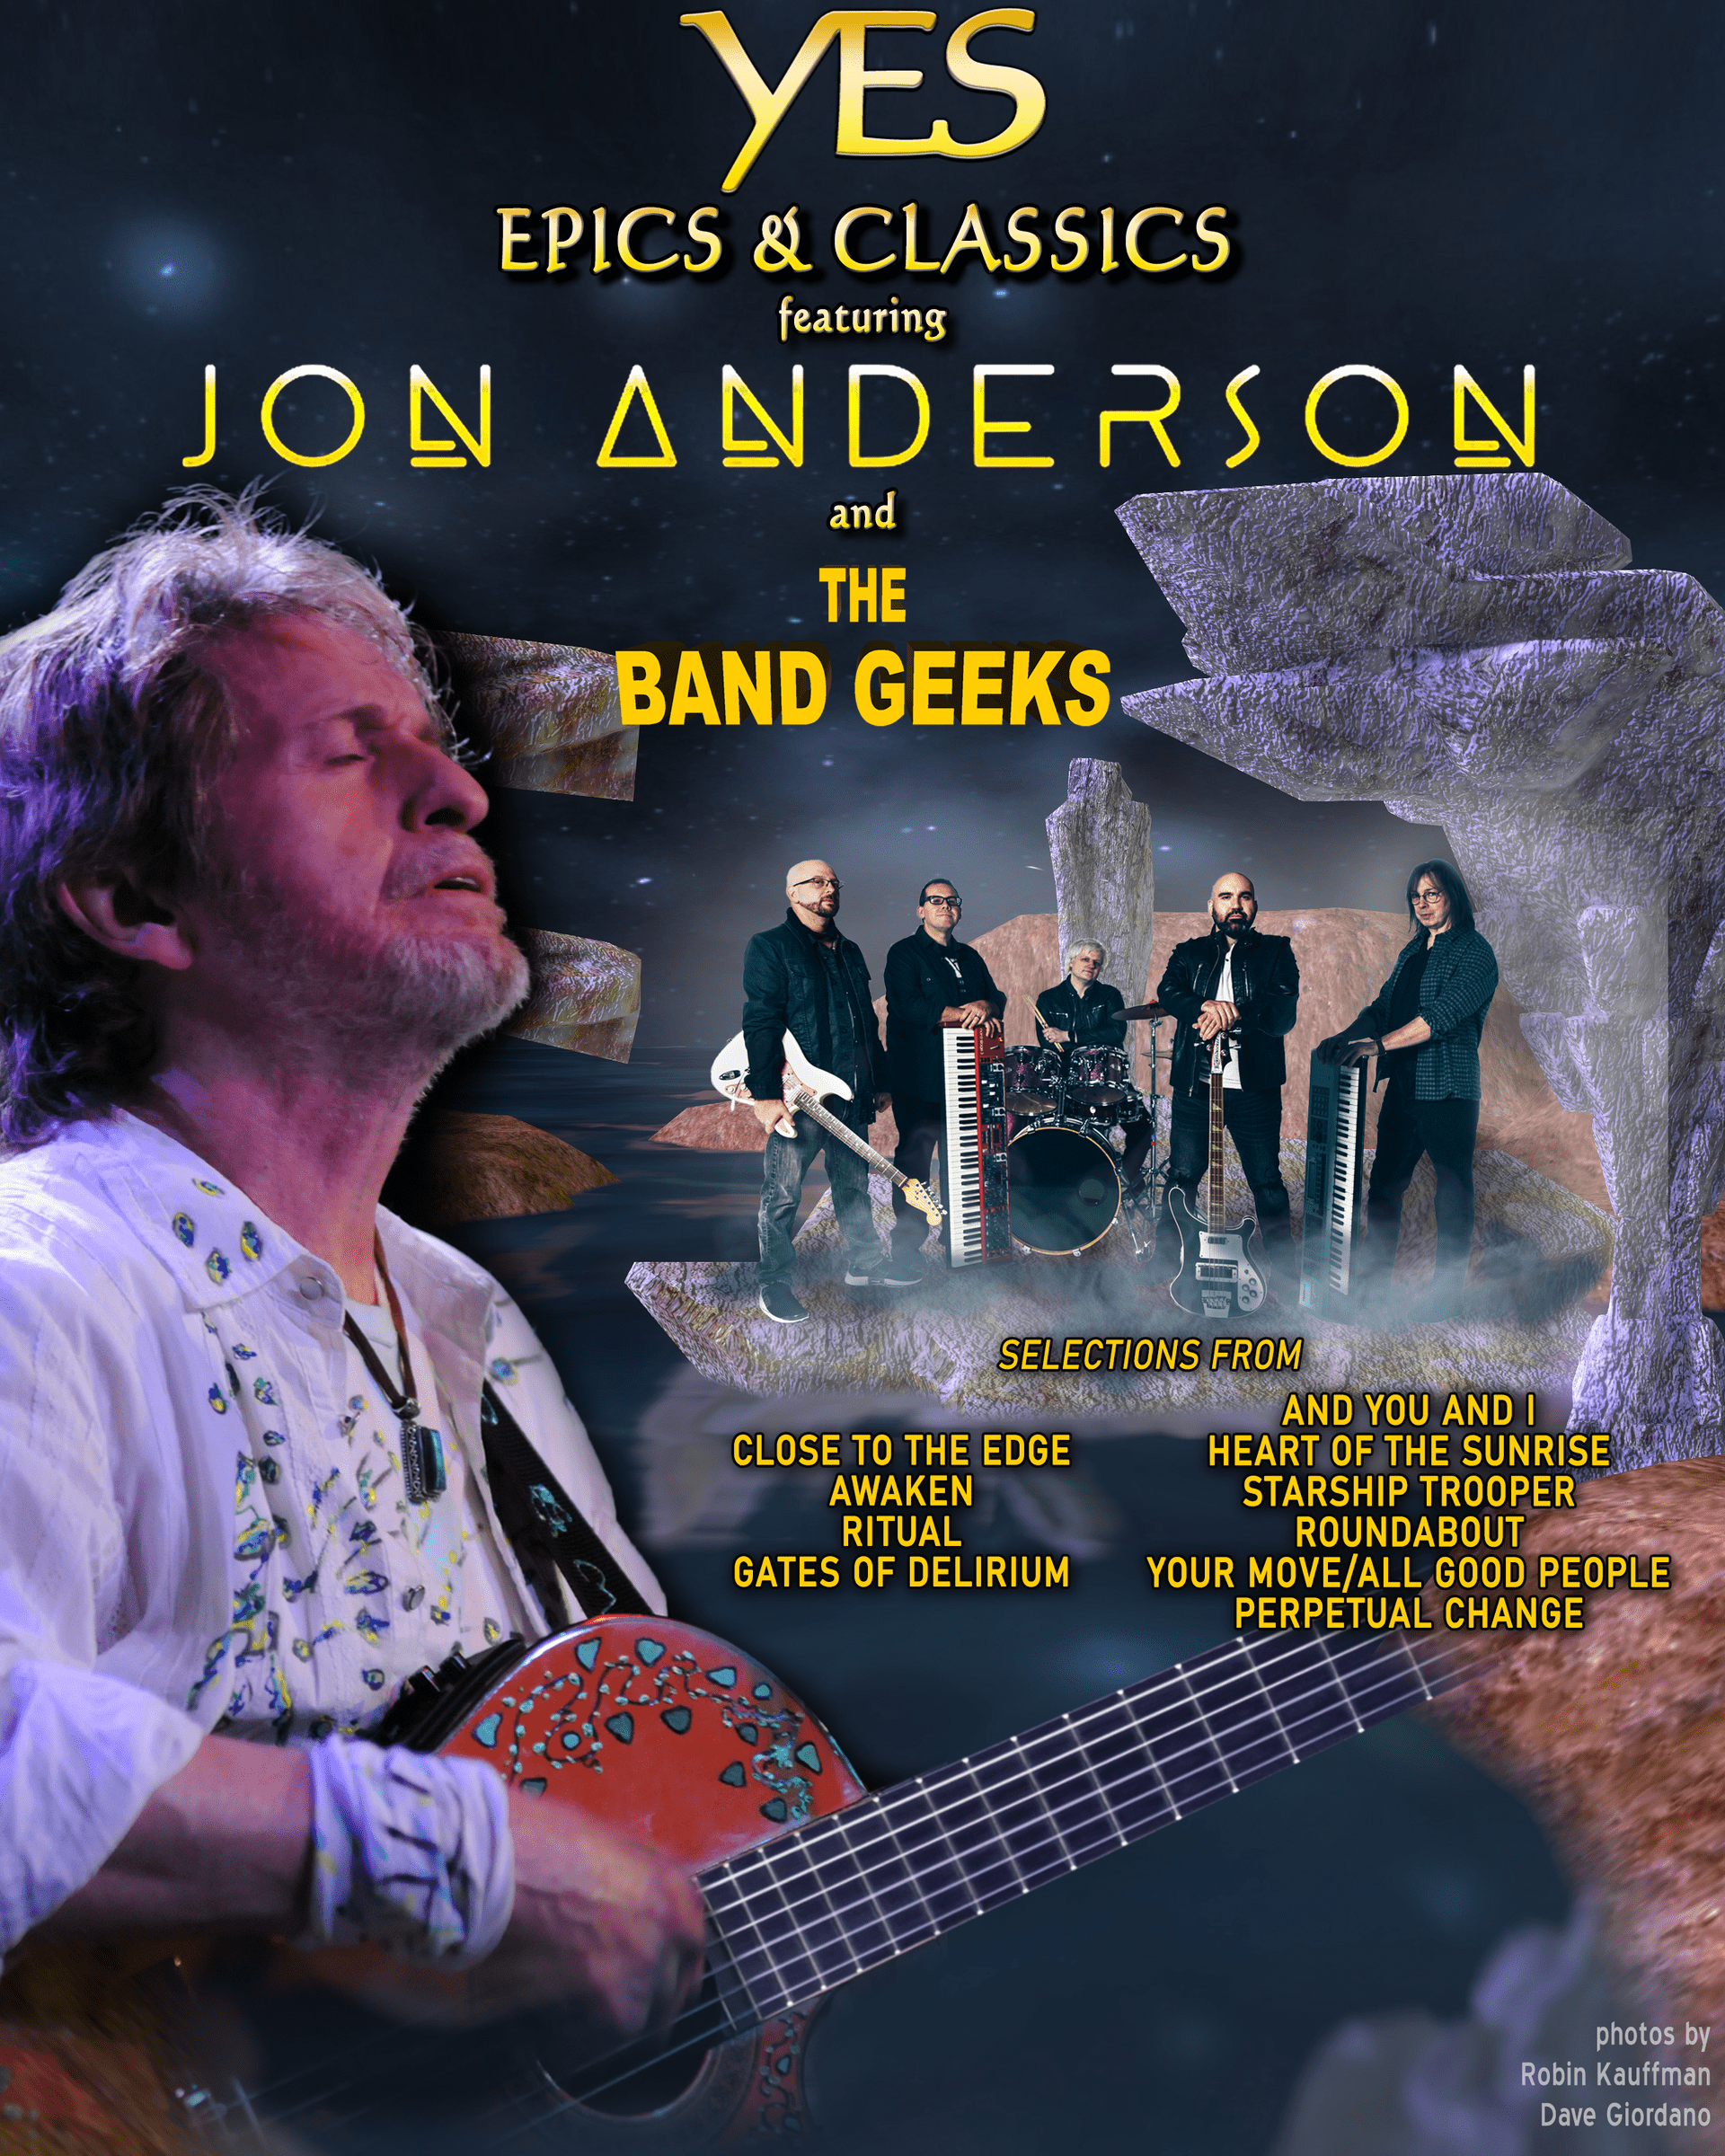 YES Epics & Classics performed by Jon Anderson and The Band Geeks Des